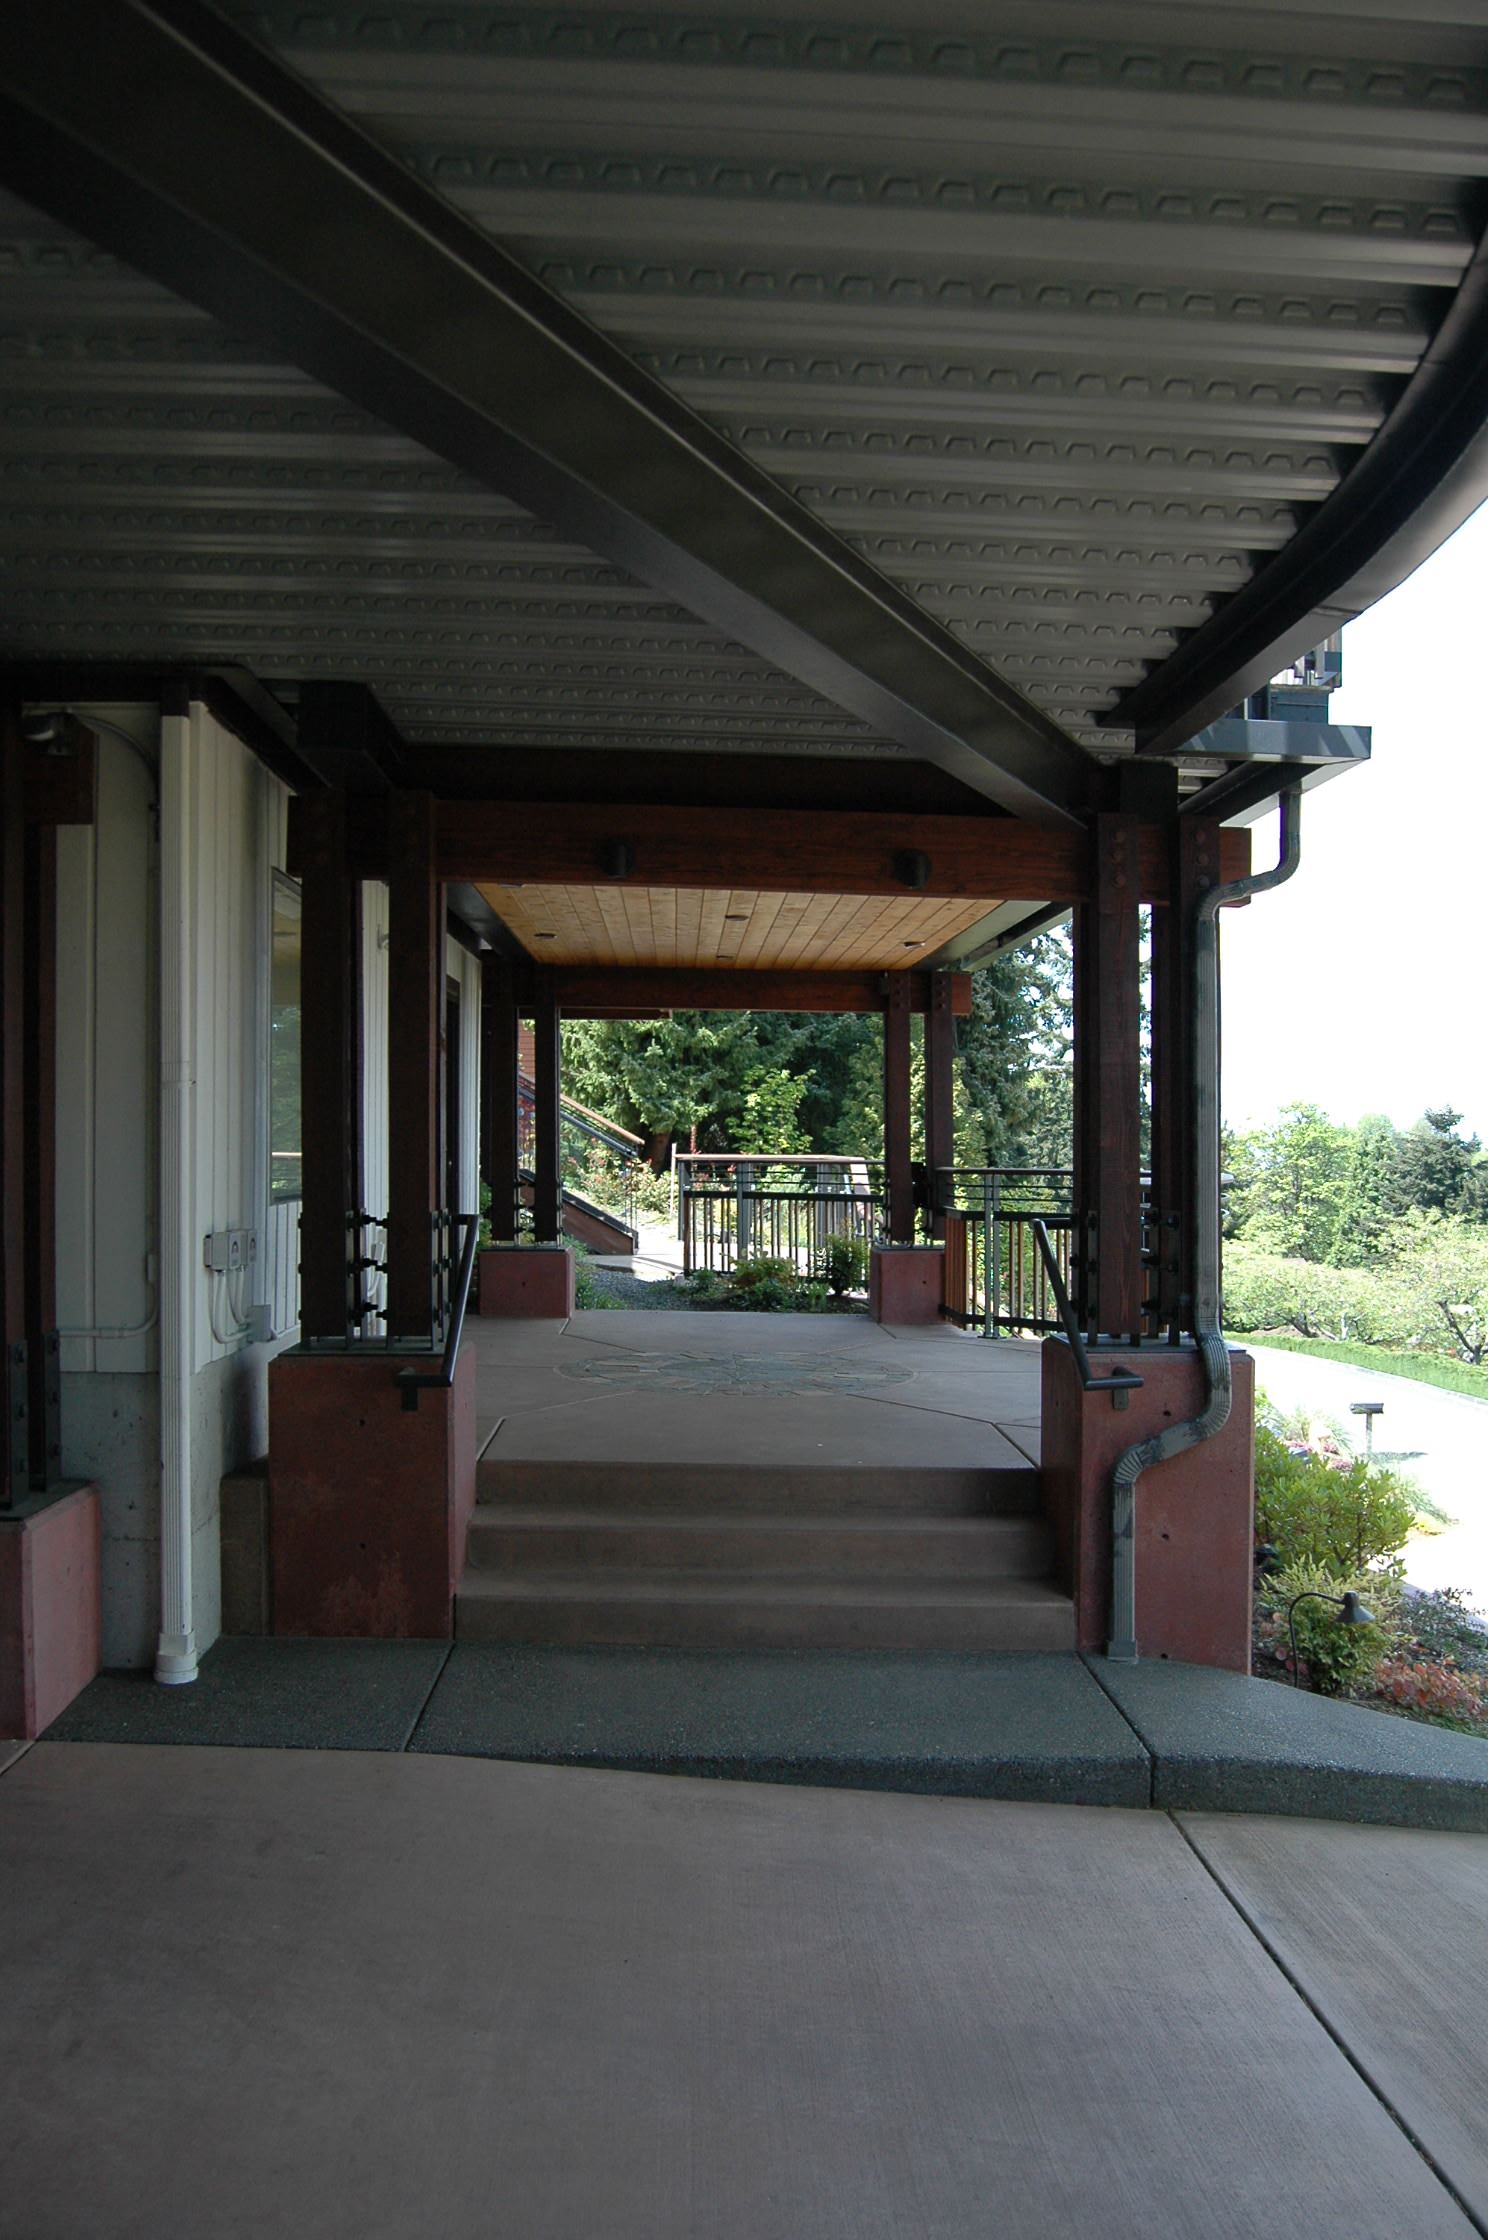 Garage entry and lower level court